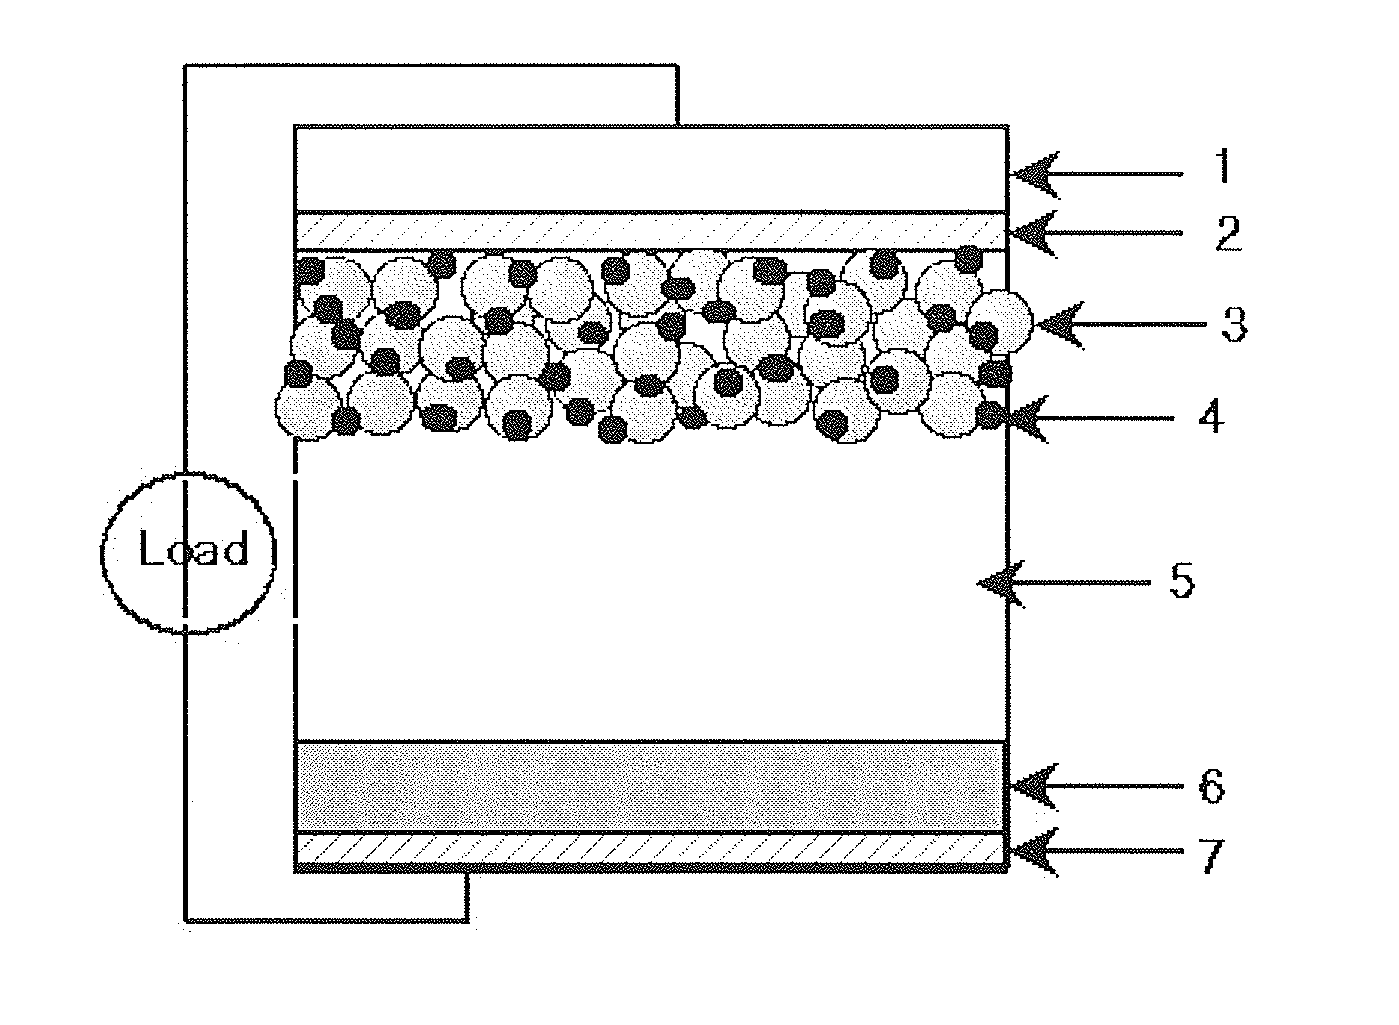 Titanium dioxide nanoparticles for fabricating photo-electrode for efficient, longlasting dye-sensitized solar cell and fabrication method thereof